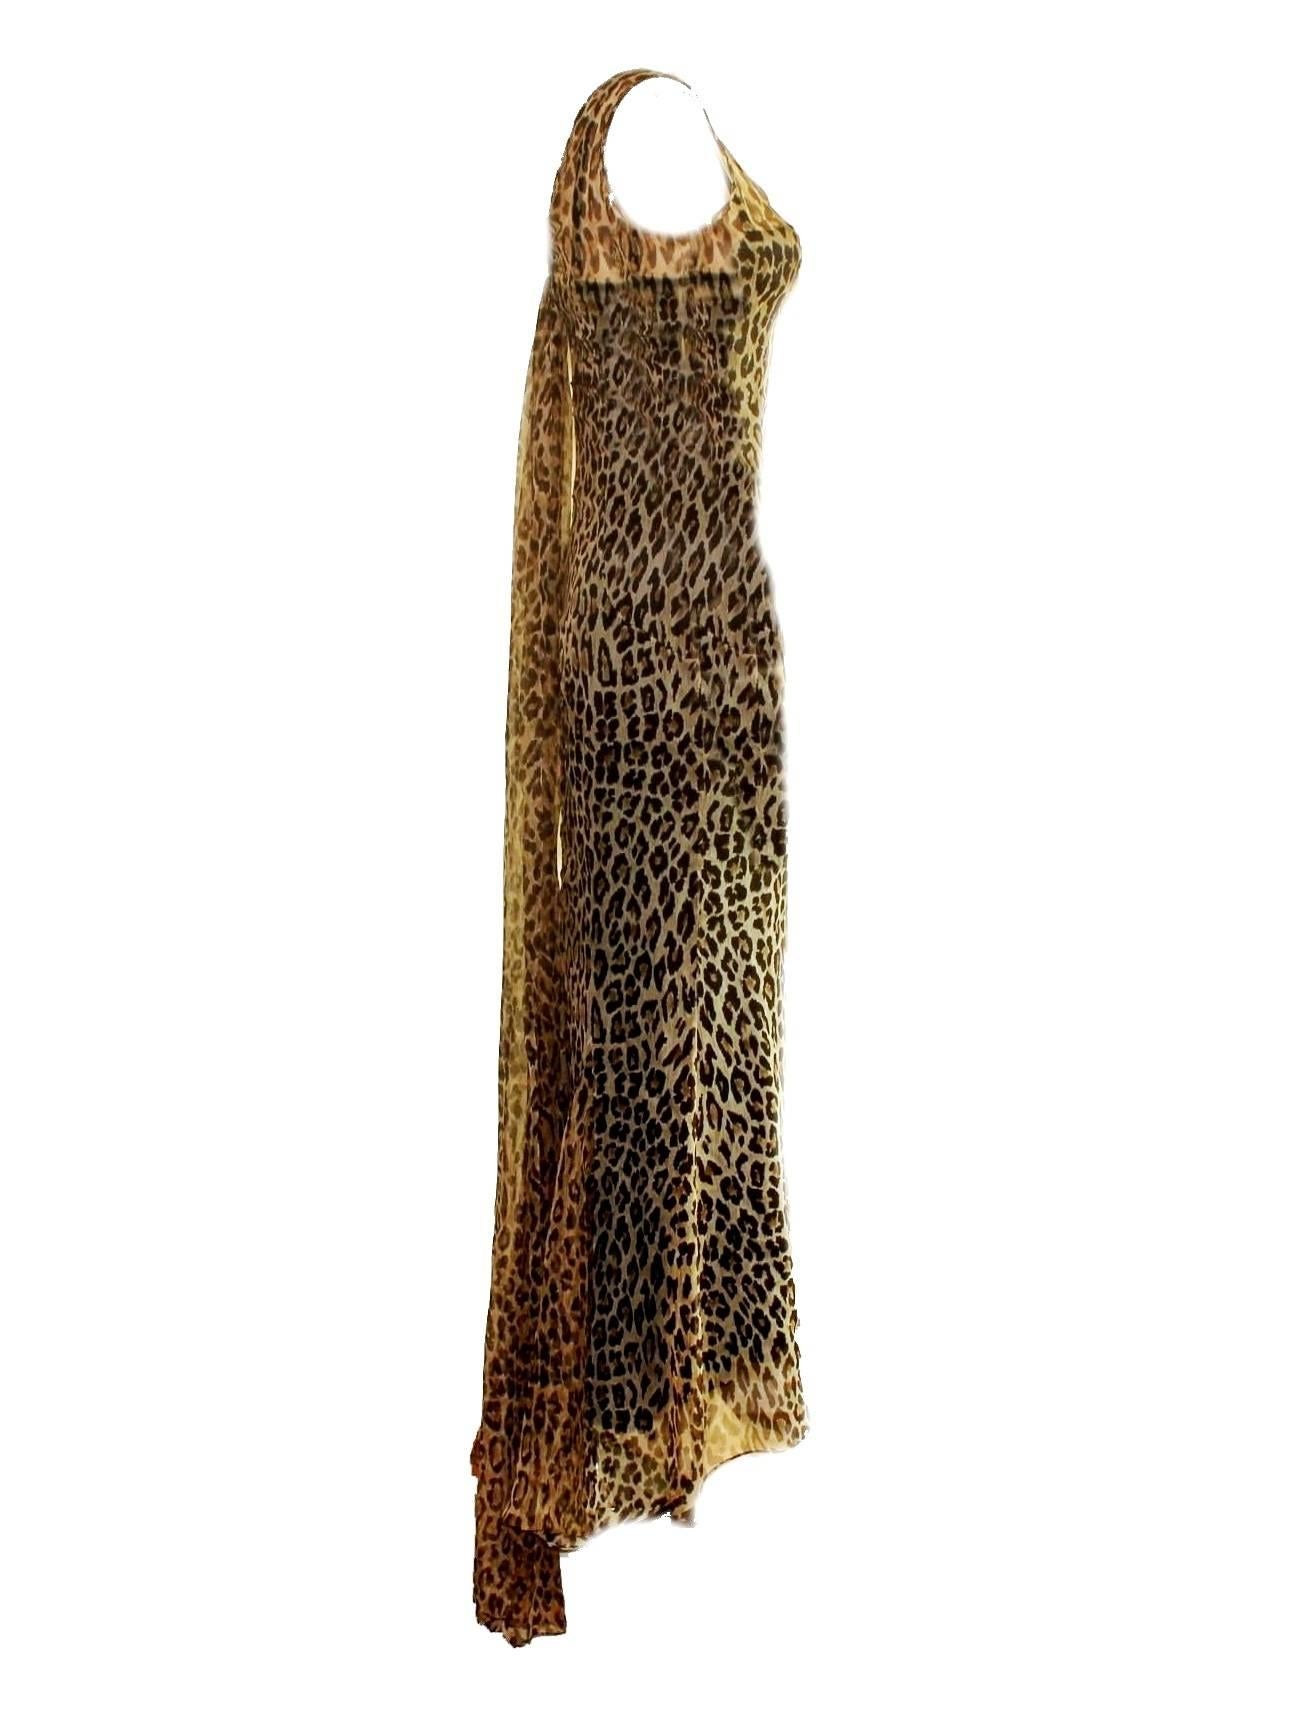 GORGEOUS

DOLCE & GABBANA

LEOPARD PRINT SILK GOWN WITH

CORSET INNER DRESS

This beautiful dress is an absolute IT-PIECE and loved by top models and many other celebrities

DETAILS:

    A DOLCE & GABBANA classic signature piece that